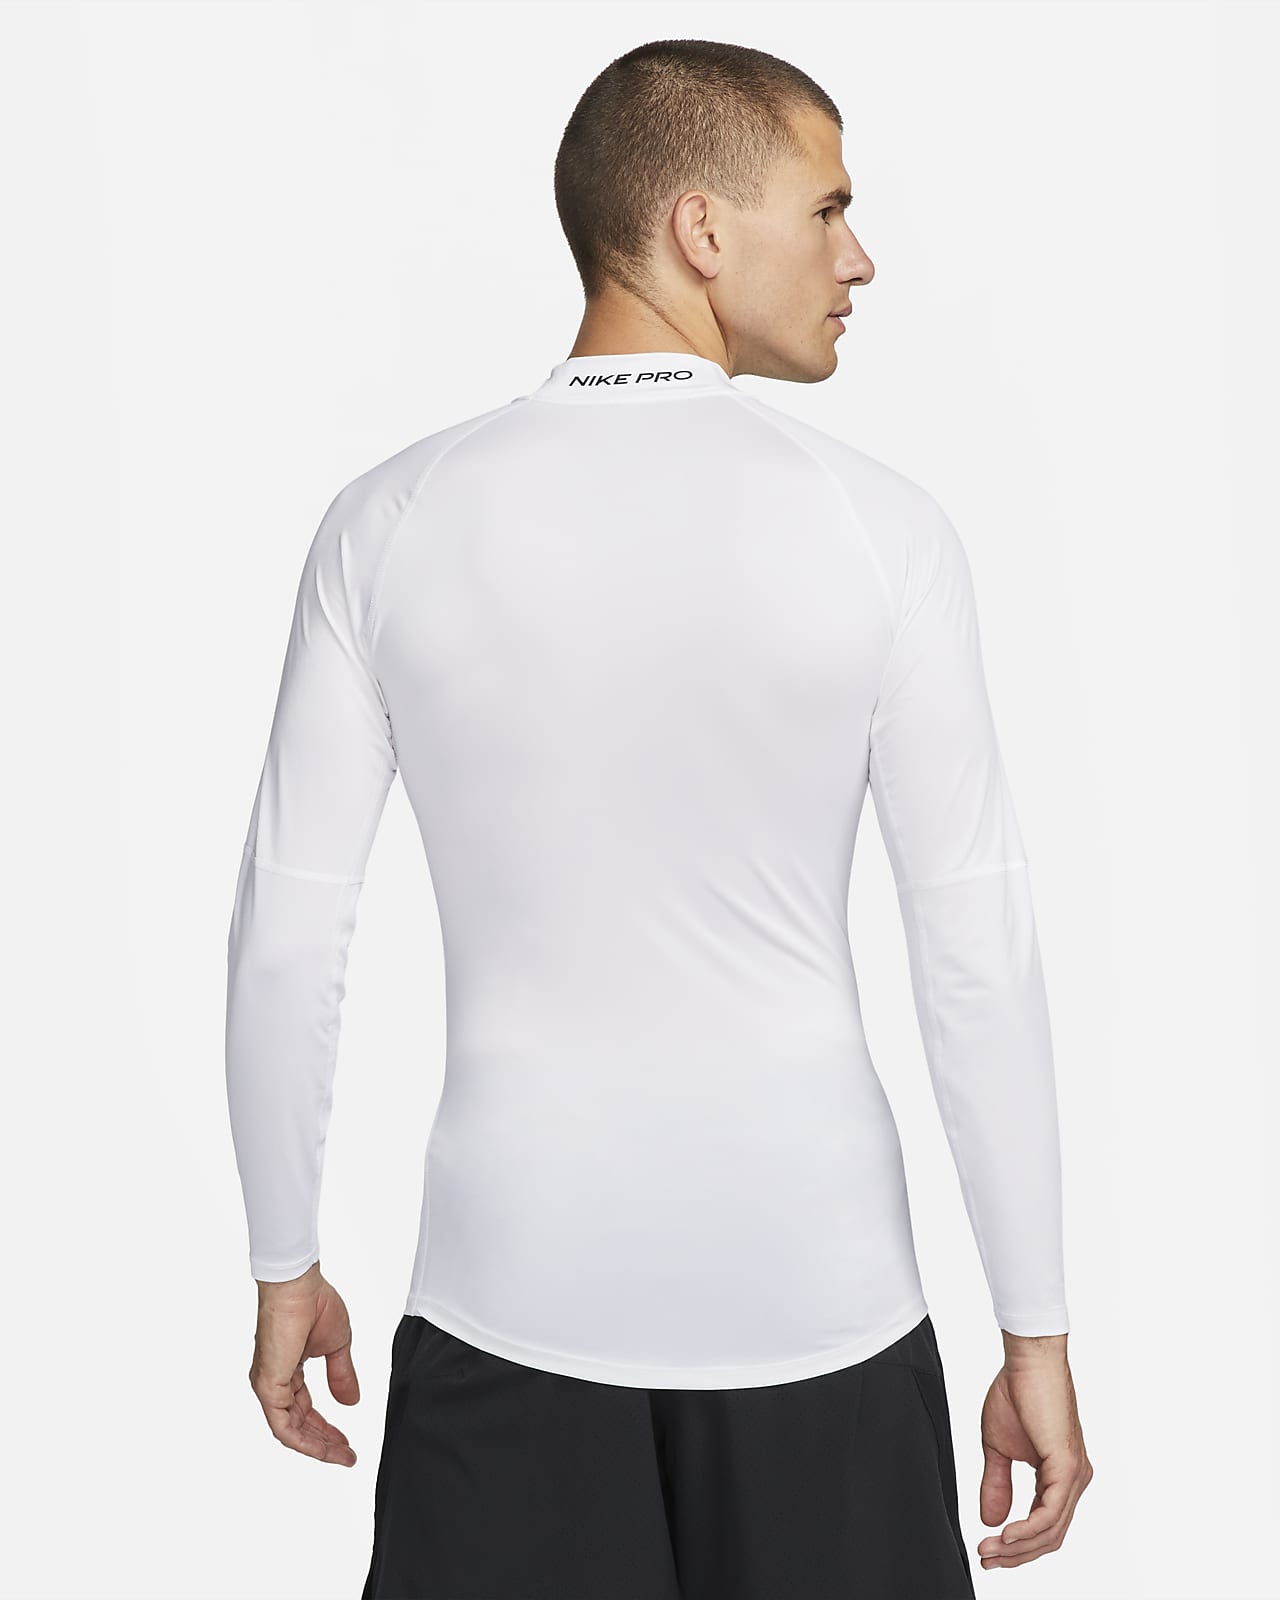 COMPRESSION LONG SLEEVE T-SHIRT (WHITE) – We Ball Sports